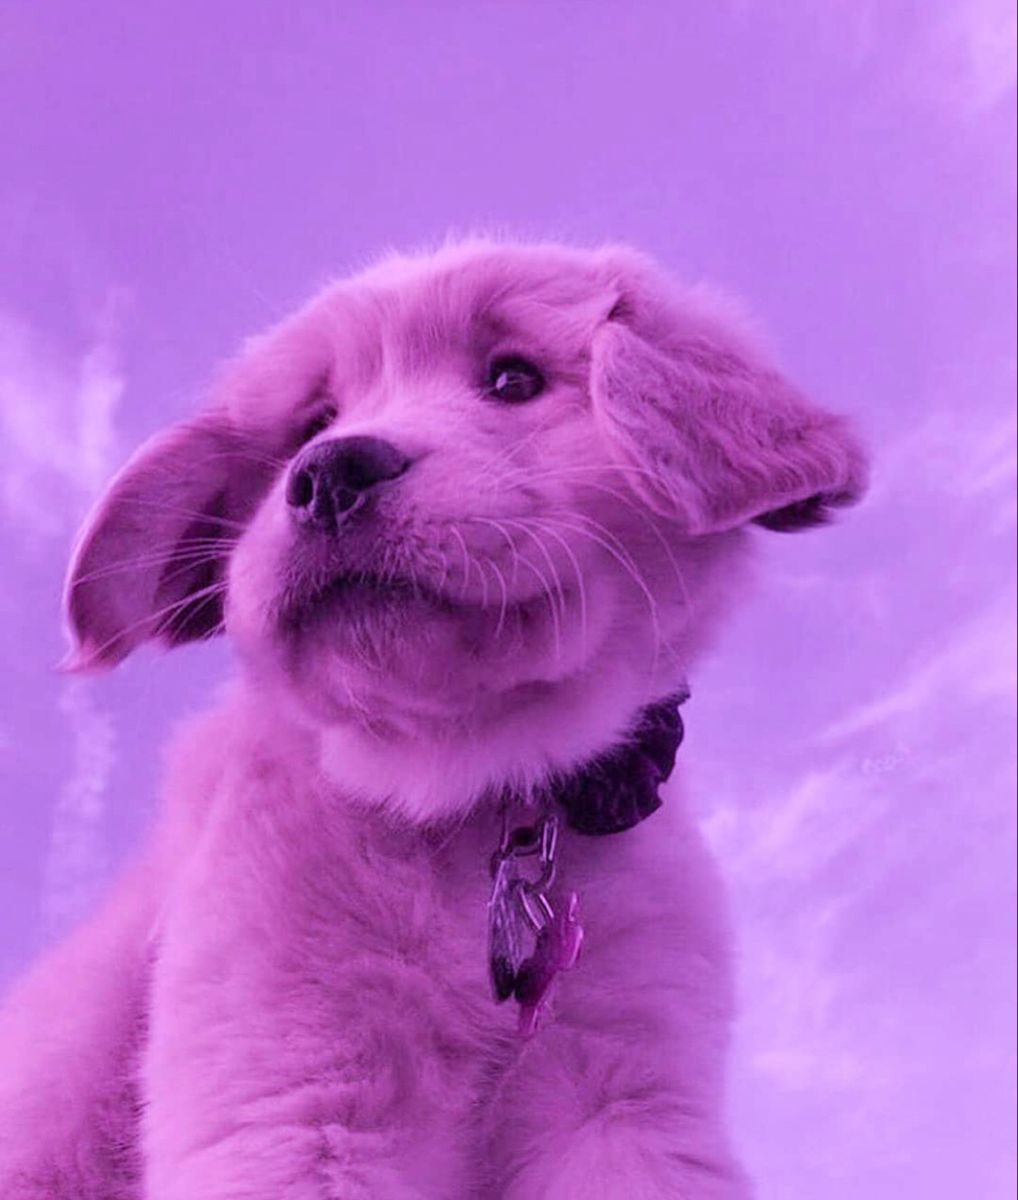 Purple aesthetic. Cute puppy wallpaper, Baby animals picture, Cute little animals